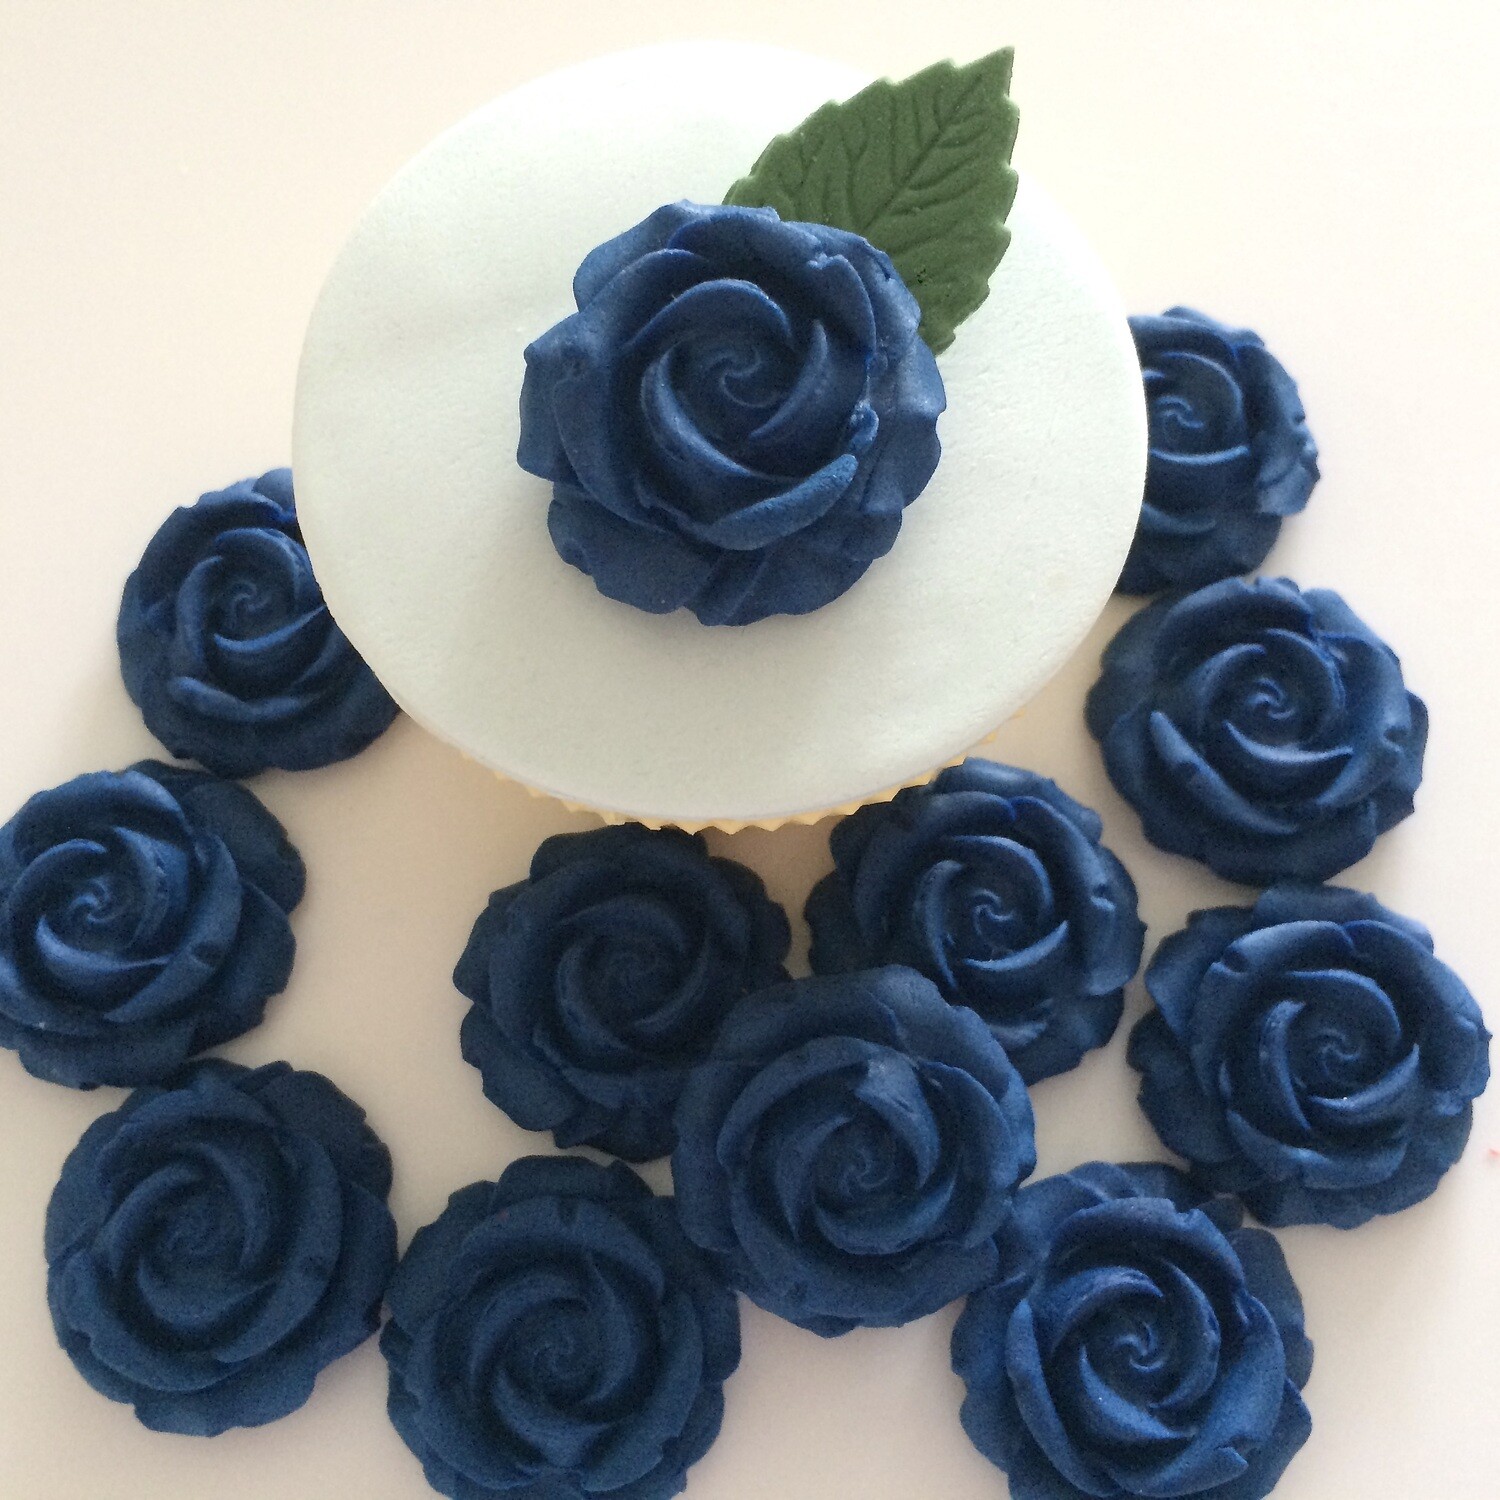 Royal Blue 3D Sugar Roses wedding cake decorations 55mm NONWIRED 